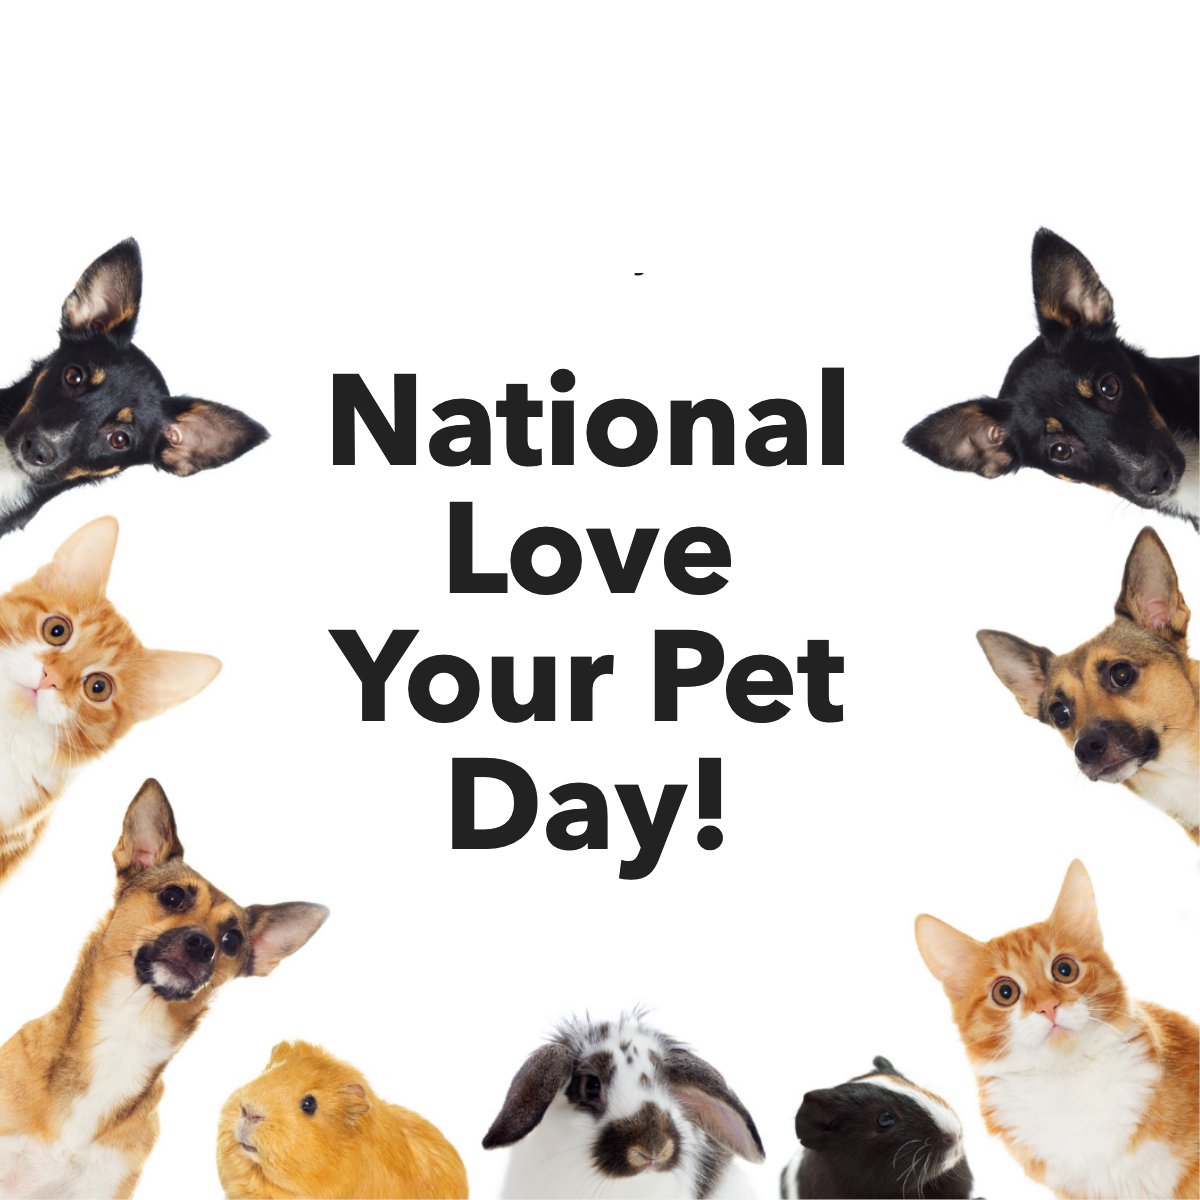 Let's be real. Every day is National Love Your Pet Day. 🐶🐱

Here's to our four-legged family members! 

How many pets do you share your home with? Tell us below! 👇

#funholiday #holiday #celebrate #celebration #pet #dog #cat
 #lannonstonerealty